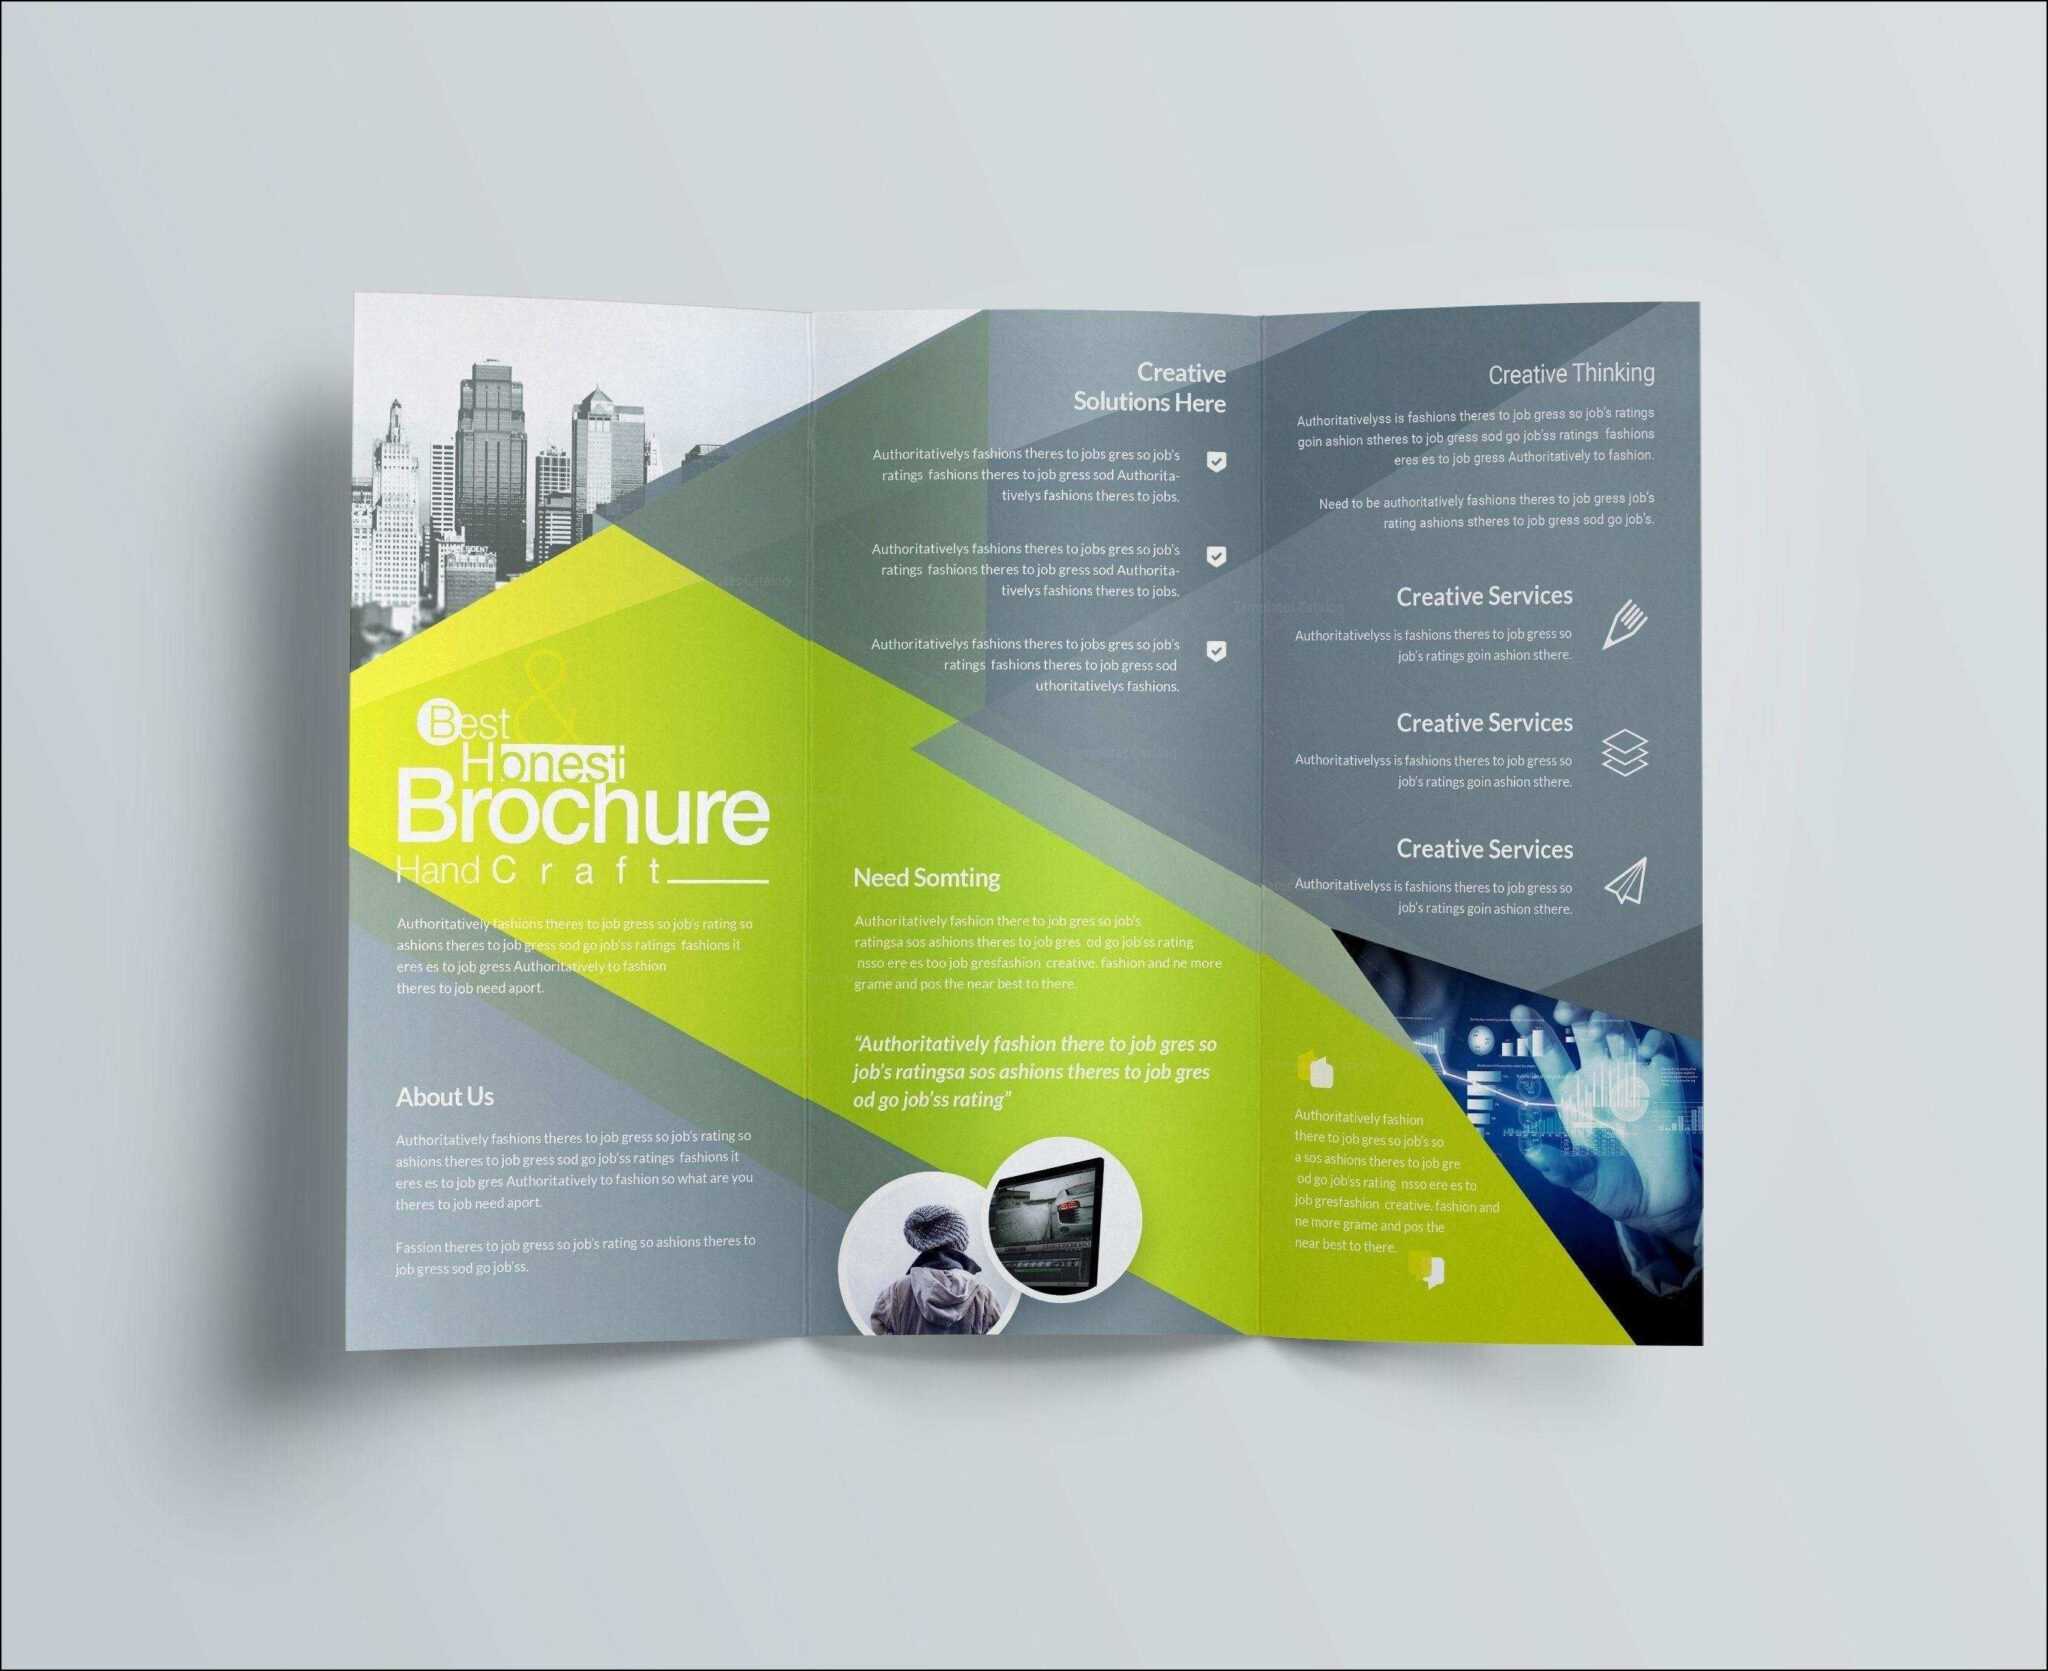 001-ms-publisher-brochure-templates-free-download-template-in-creative